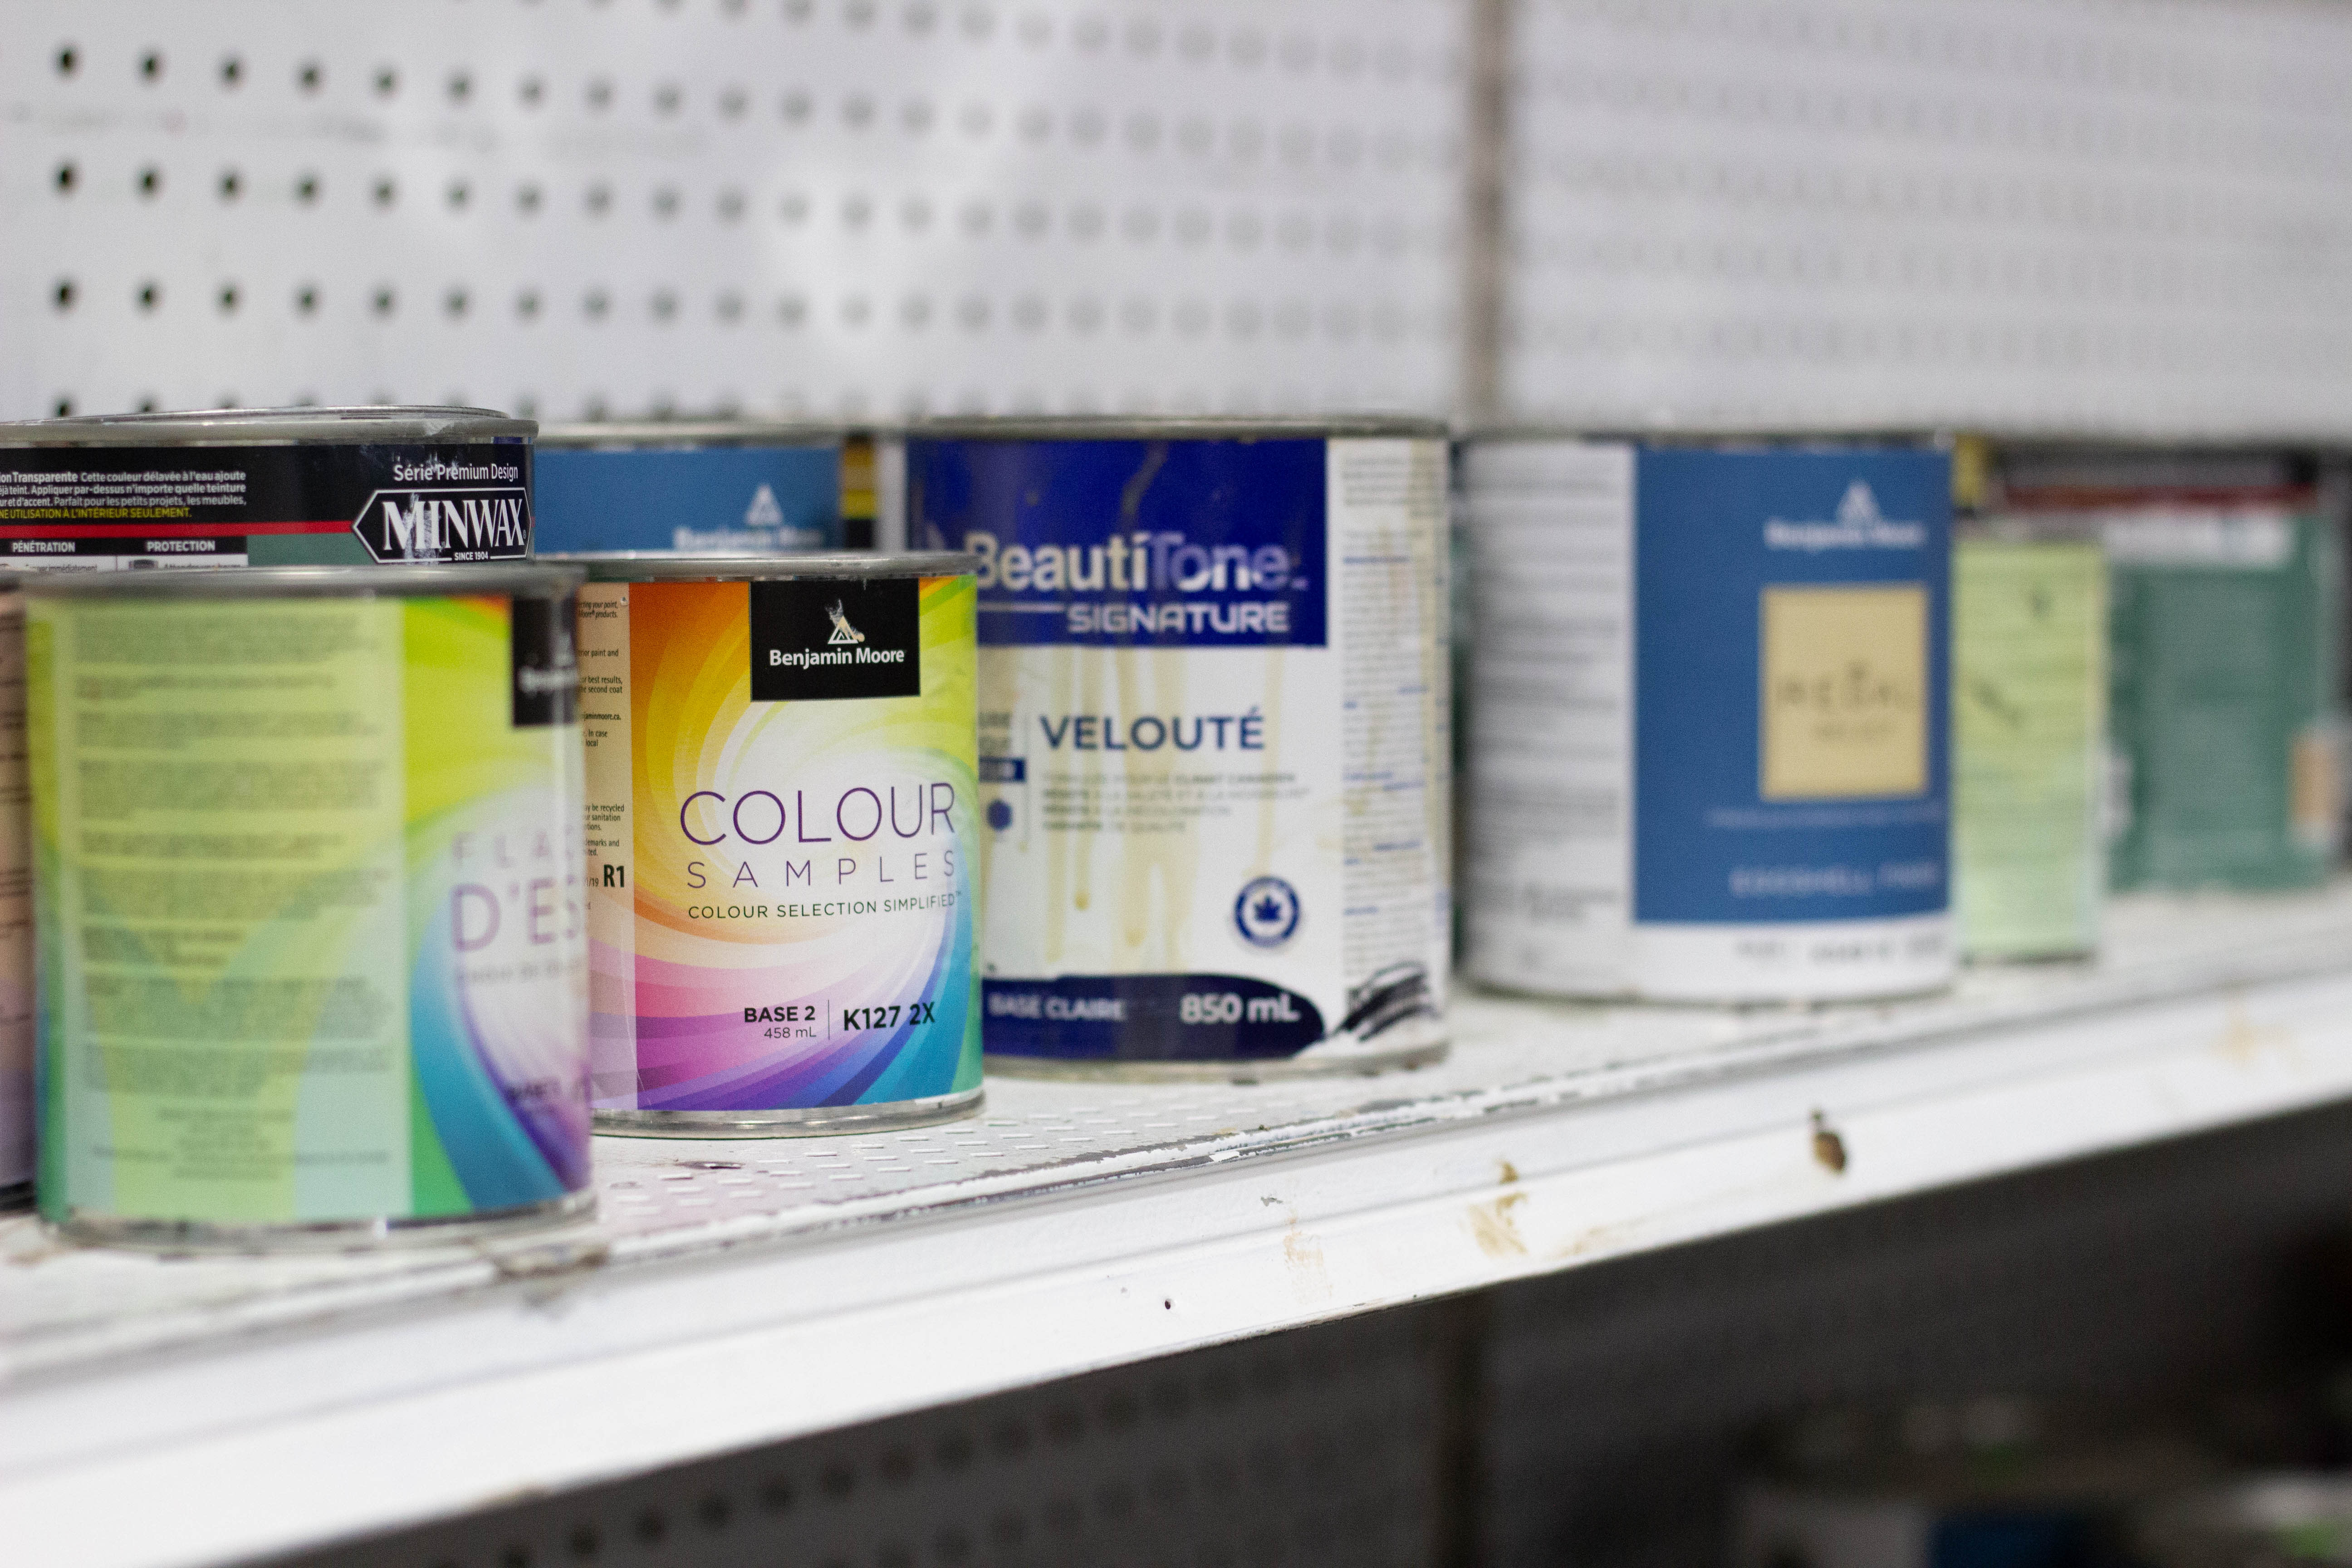 Paint cans on shelf at Habitat for Humanity ReStore